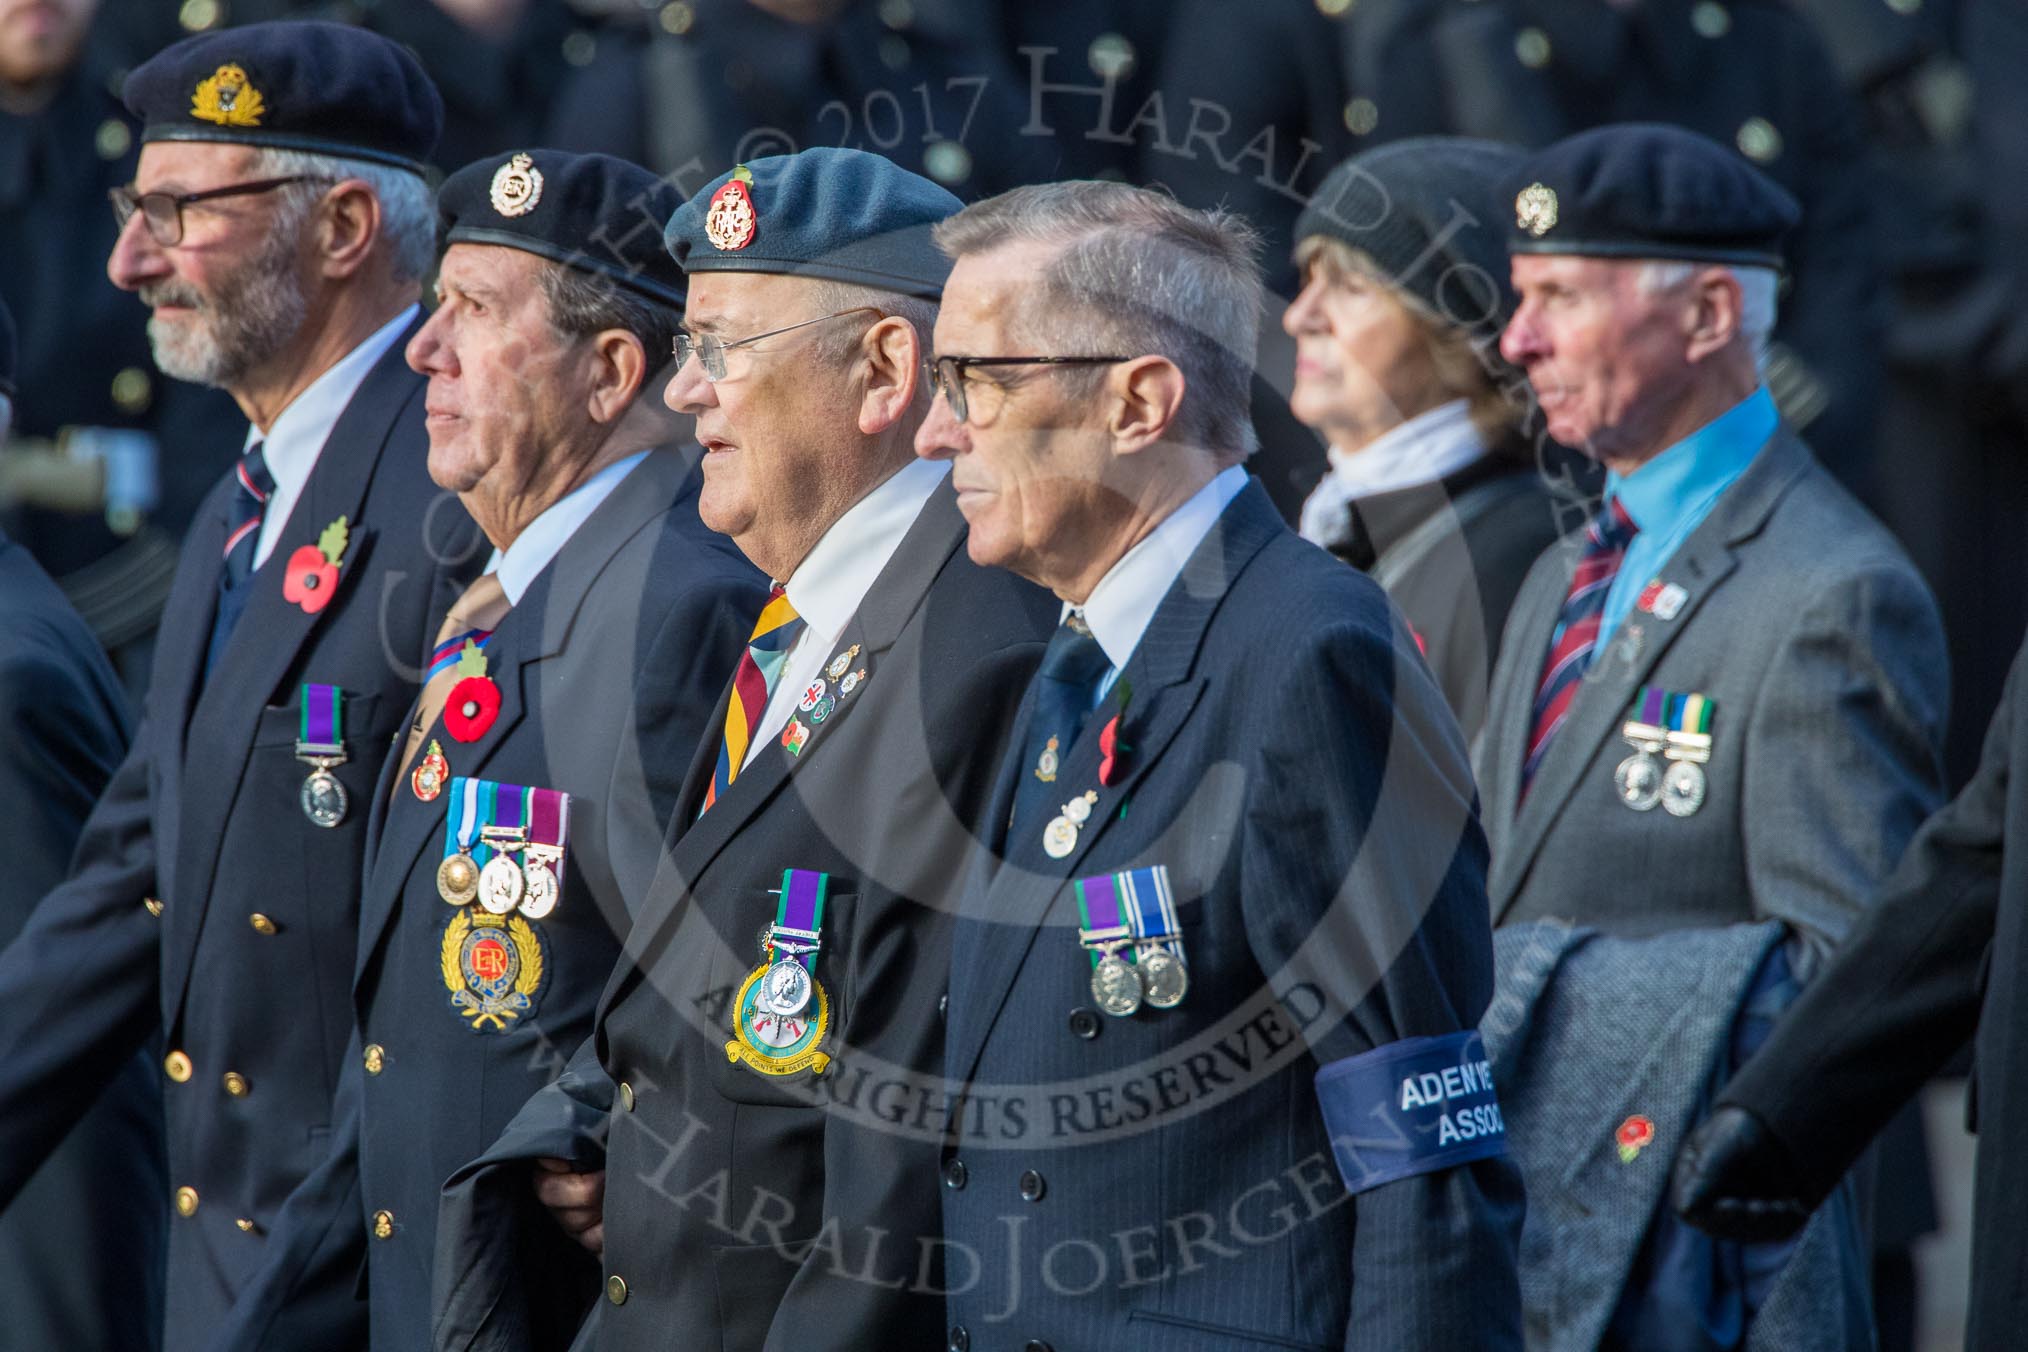 Aden Veterans Association (Group F16, 53 members) during the Royal British Legion March Past on Remembrance Sunday at the Cenotaph, Whitehall, Westminster, London, 11 November 2018, 11:52.